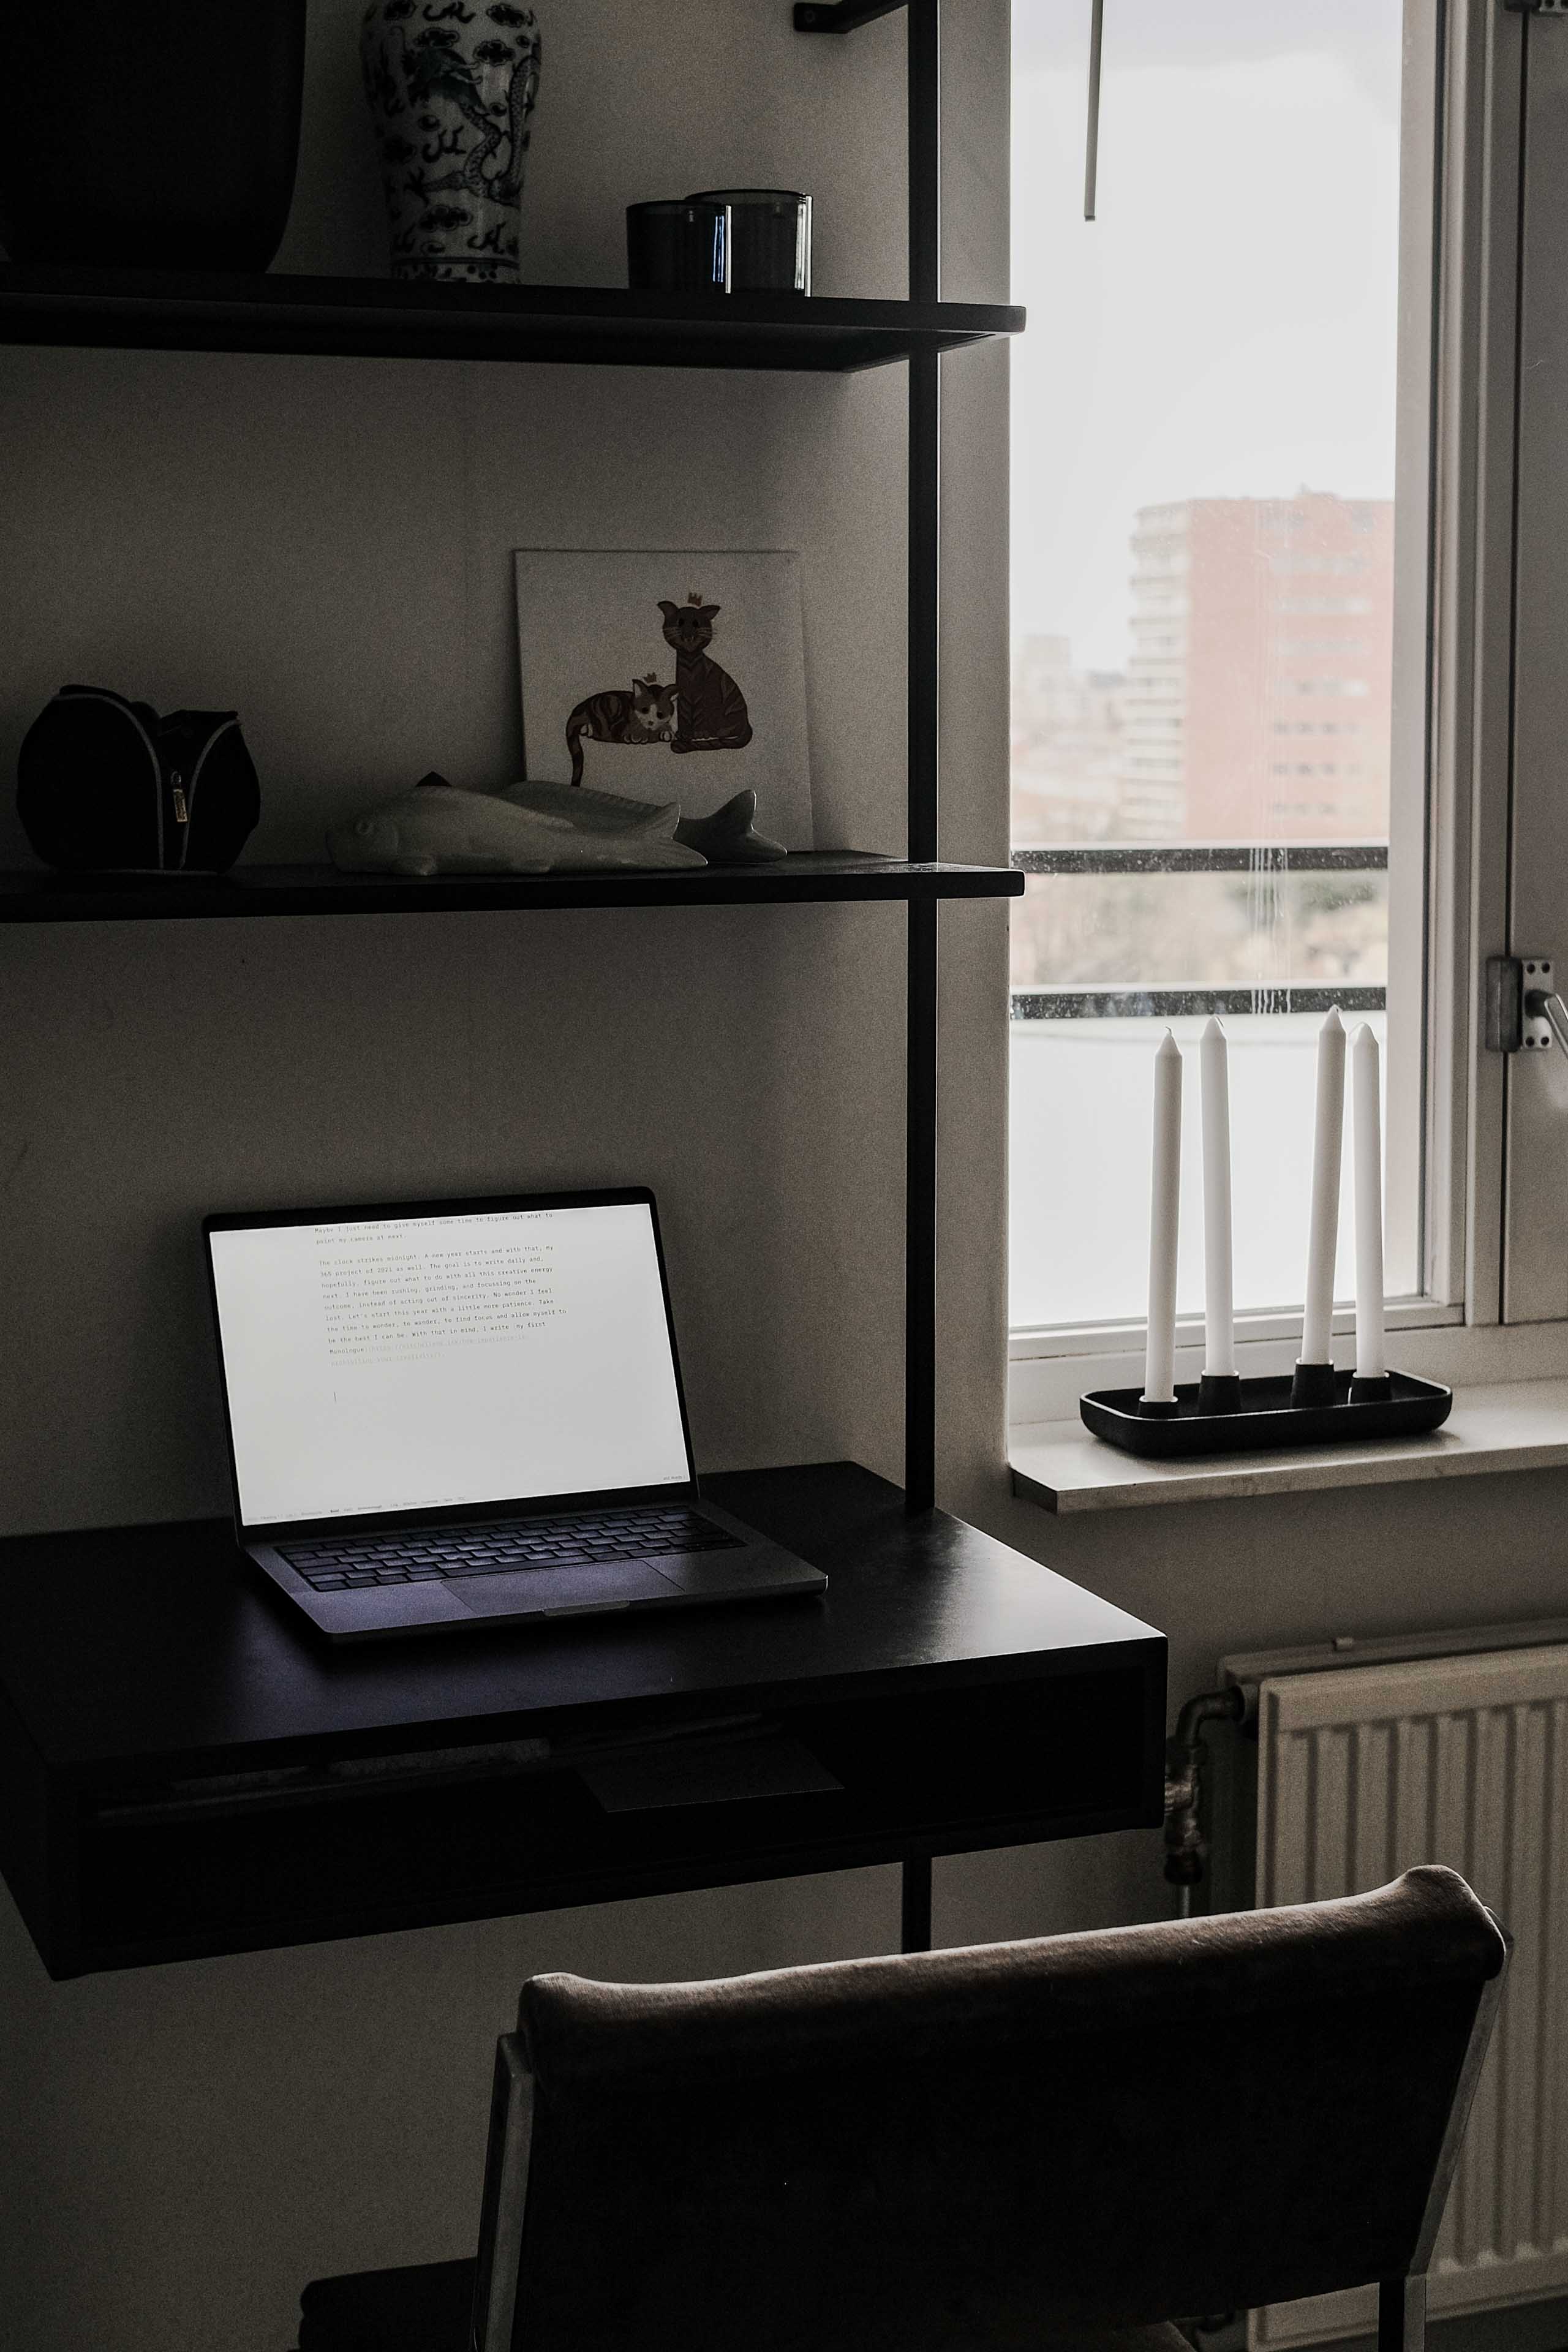 A computer on a desk, next to a window.